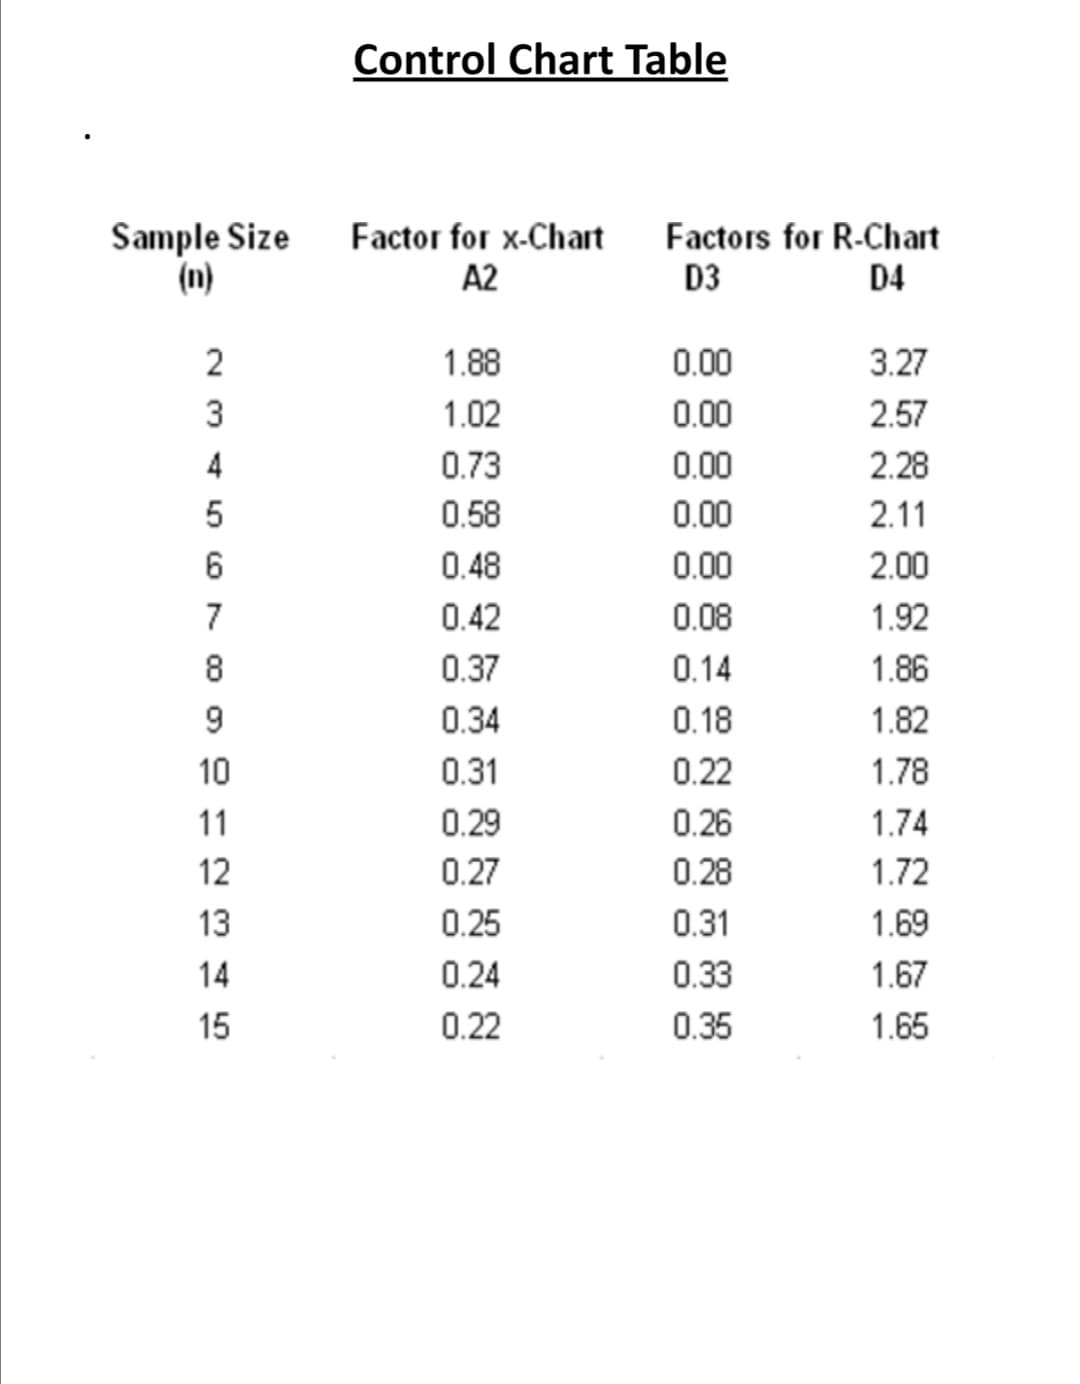 Control Chart Table
Sample Size Factor for x-Chart
(n)
Factors for R-Chart
D3
A2
D4
2
1.88
0.00
3.27
1.02
0.00
2.57
0.73
0.00
2.28
0.58
0.00
2.11
6
0.48
0.00
2.00
7
0.42
0.08
1.92
8
0.37
0.14
1.86
9.
0.34
0.18
1.82
10
0.31
0.22
1.78
11
0.29
0.26
1.74
12
0.27
0.28
1.72
13
0.25
0.31
1.69
14
0.24
0.33
1.67
15
0.22
0.35
1.65
N M 4
